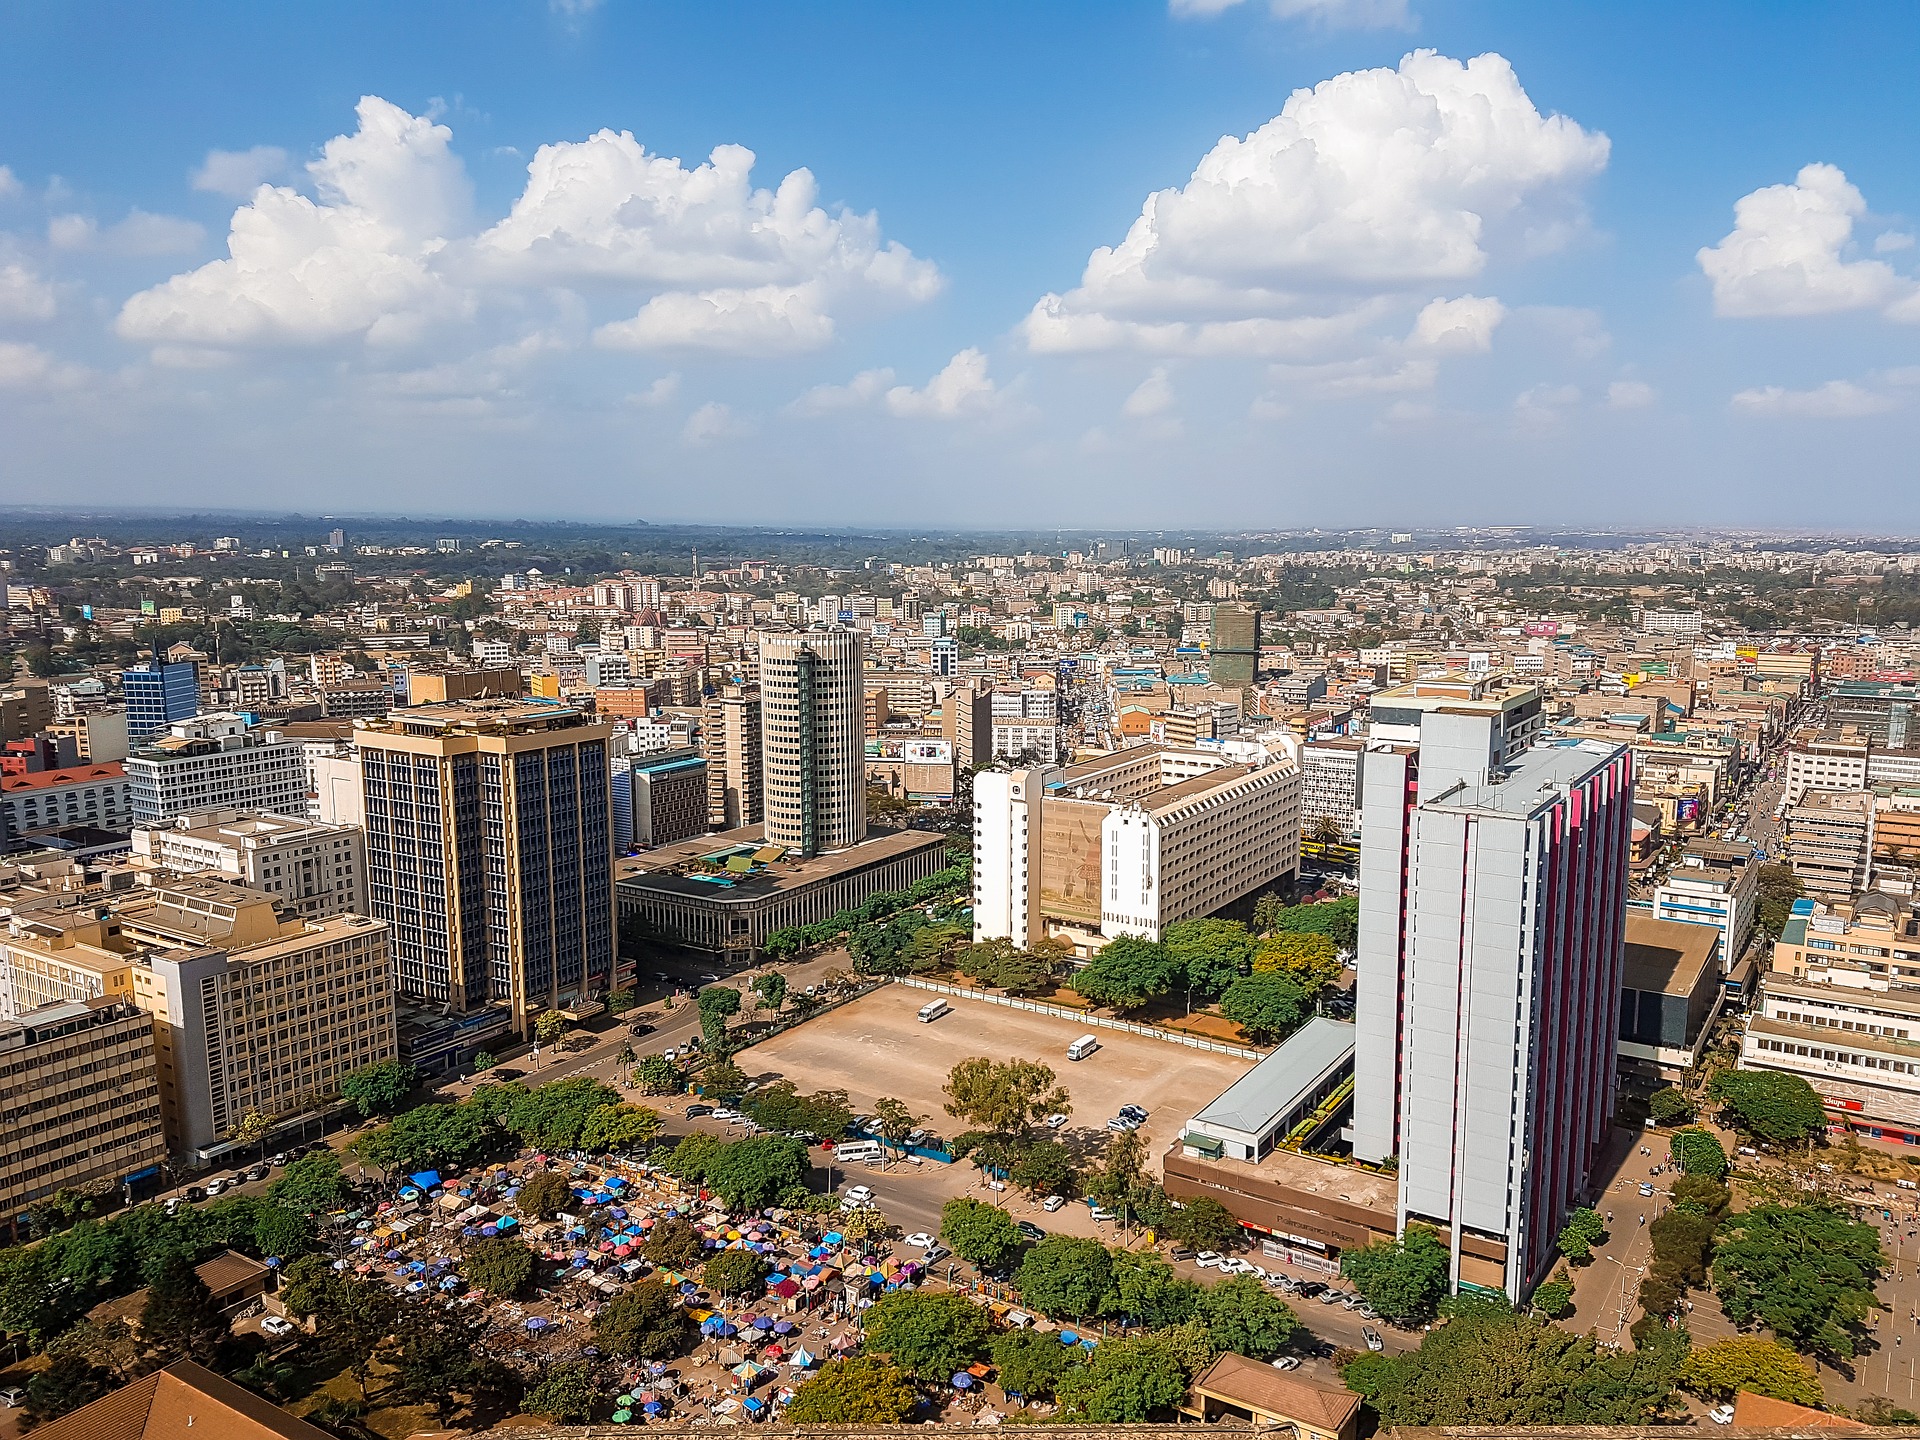 NAIROBI. - 5 NIGHTS IN THE CITY. Nairobi is a bustling metropolis with so much to see and do. Here, you’ll meet with spoken word artists, health journalists, and filmmakers. You’ll explore the downtown core with former street kids who will share stories of how they survived. You’ll visit a creative centre for artists and activists in the city. You’ll also meet our charity partner, youth reporters in a slum and learn about how they tell stories about their community.